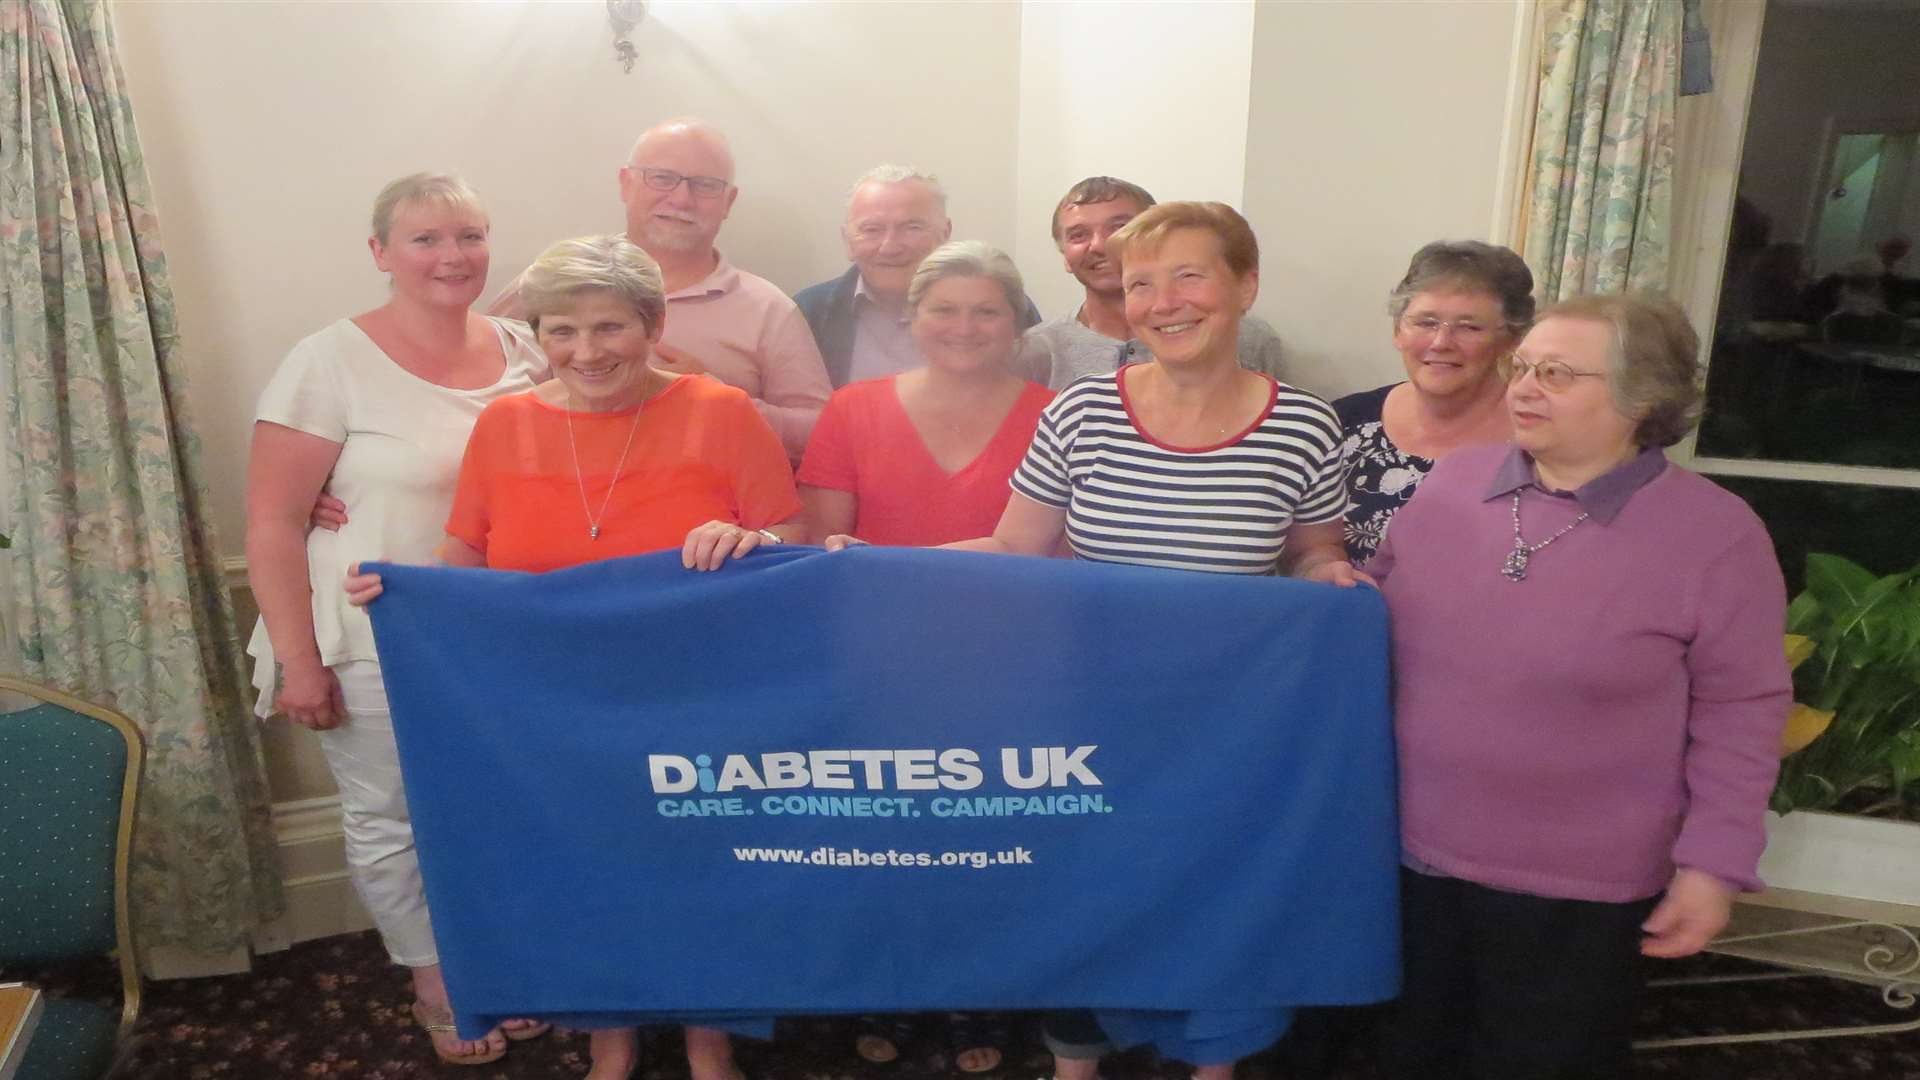 Eileen Docherty, front left, with members of the Thanet Diabetes UK group